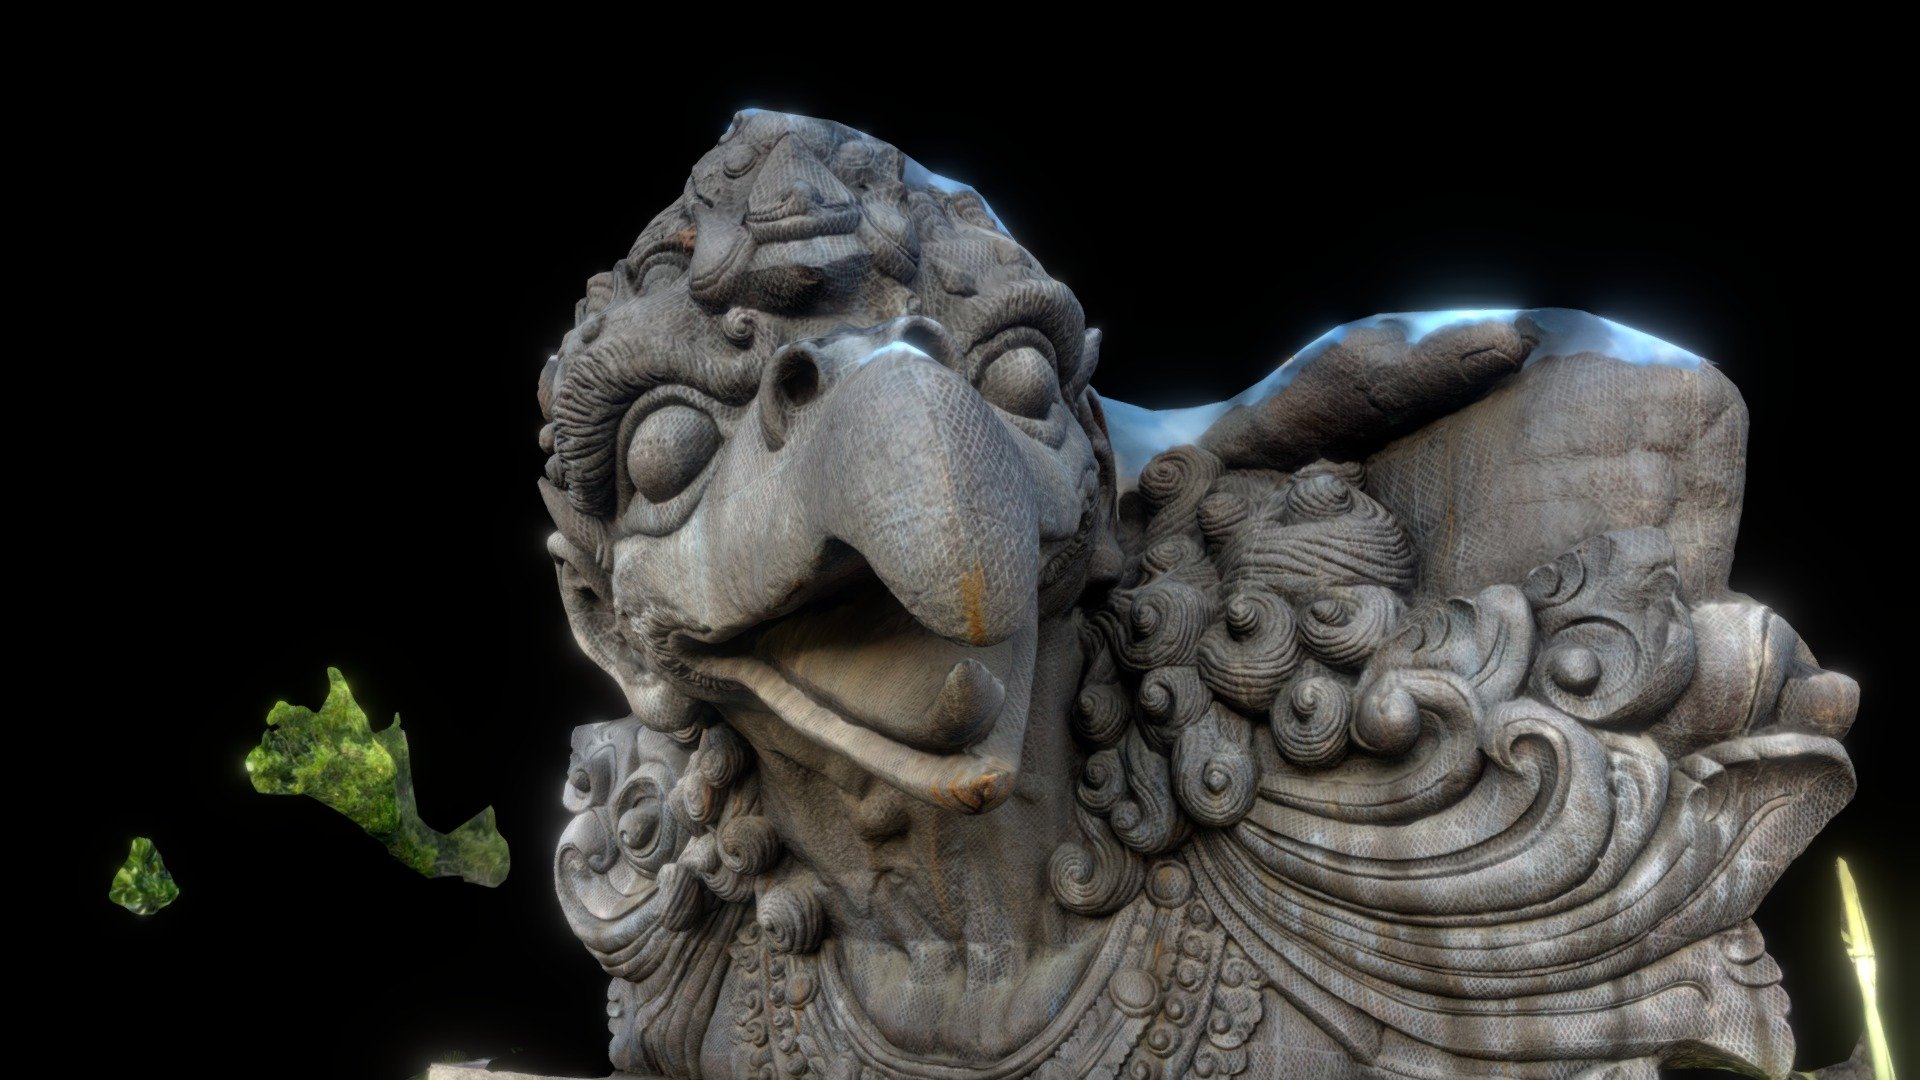 please indicate the authorship
3D model of the statue of Garuda Wisnu Kencana, a massive statue of a half-man, half-bird creature that is located in Bali, Indonesi. The statue is also a symbol of Balinese culture and heritage, and it is a popular tourist destination.

I hope this is helpful! - The Guardian - Buy Royalty Free 3D model by Roman Rö (@romanro) 3d model